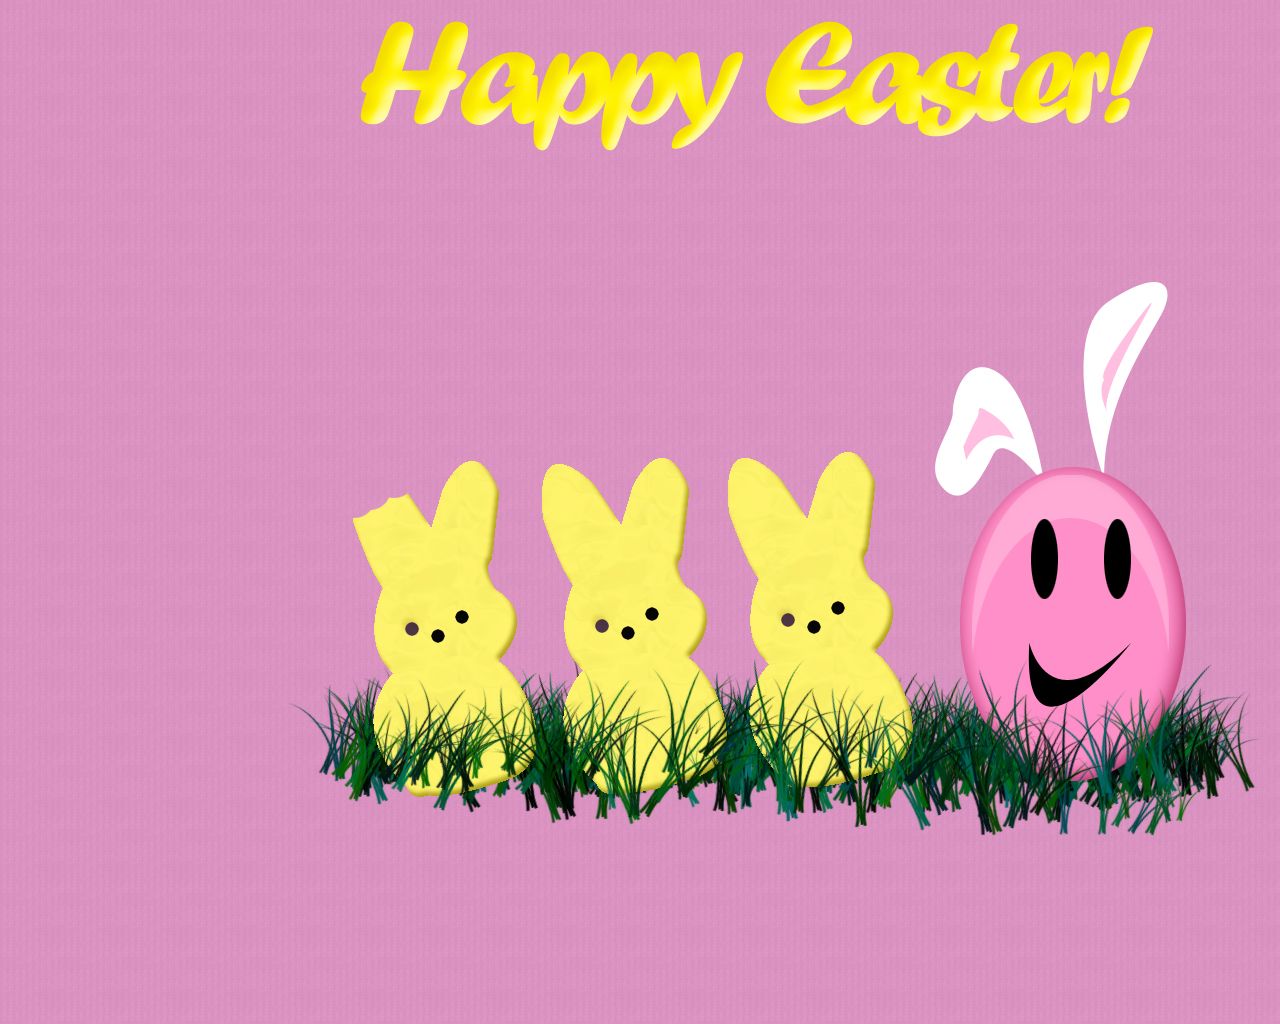 A happy easter card with three bunnies and one smiling face - Easter